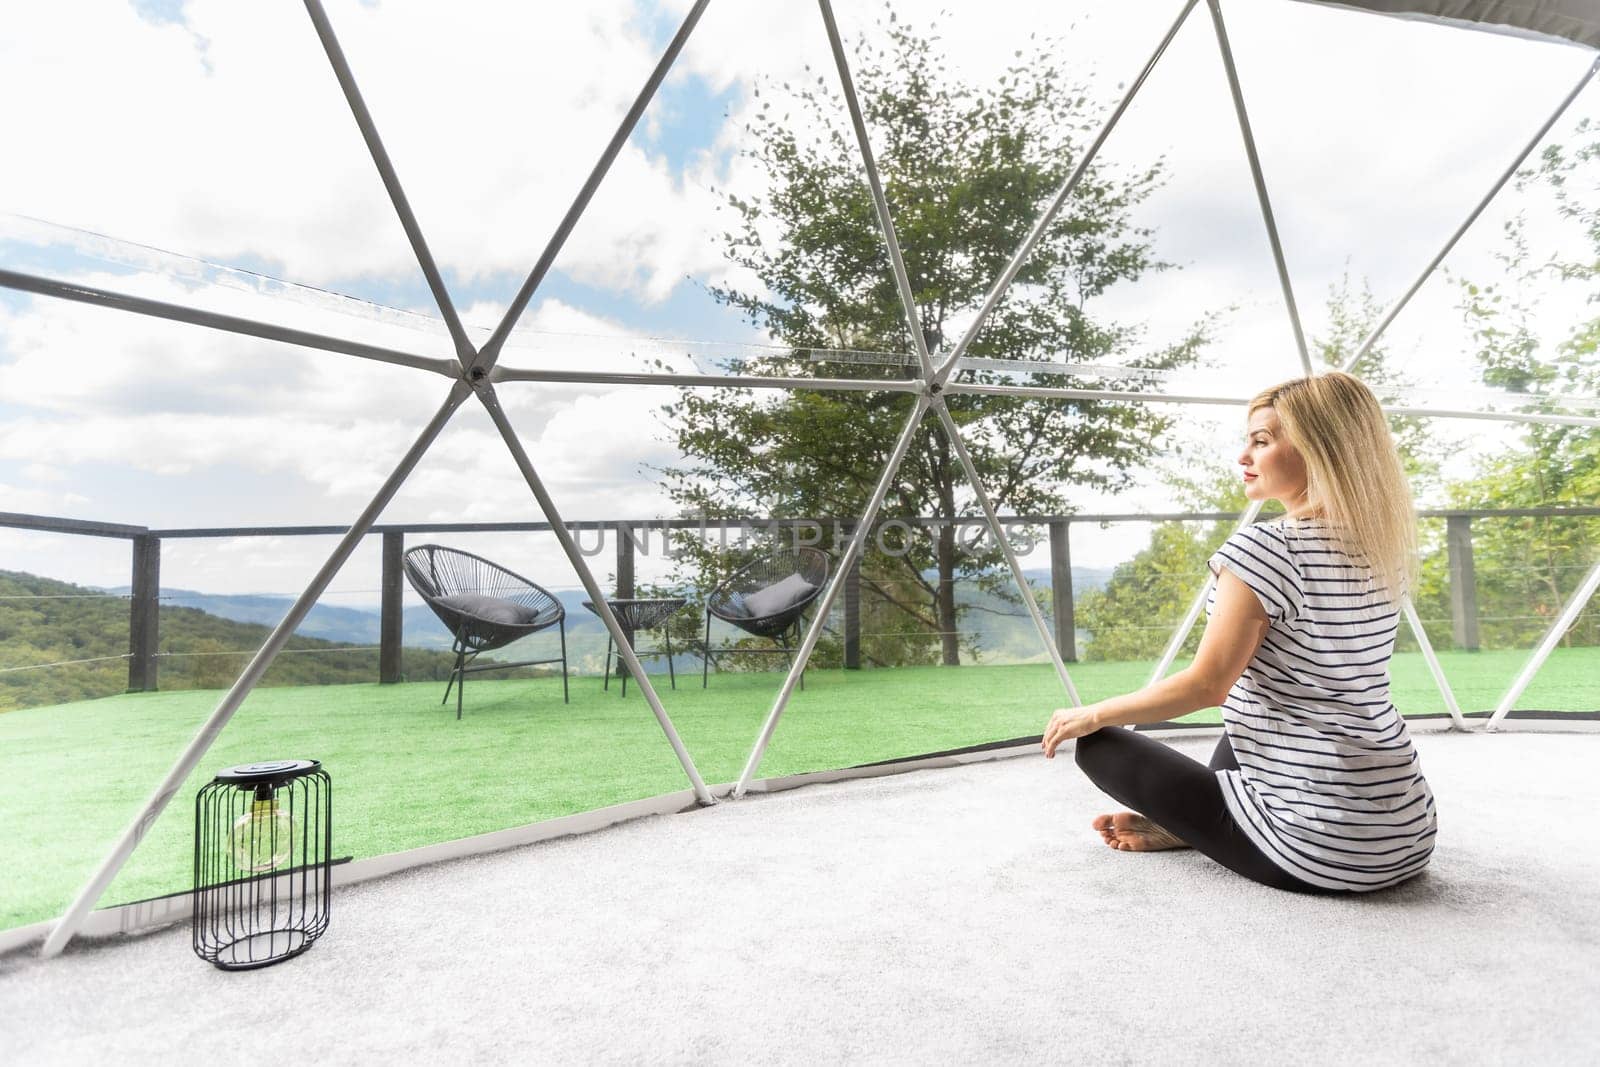 Transparent bubble tent at glamping, Lush forest around and interior. woman resting in glamping by Andelov13